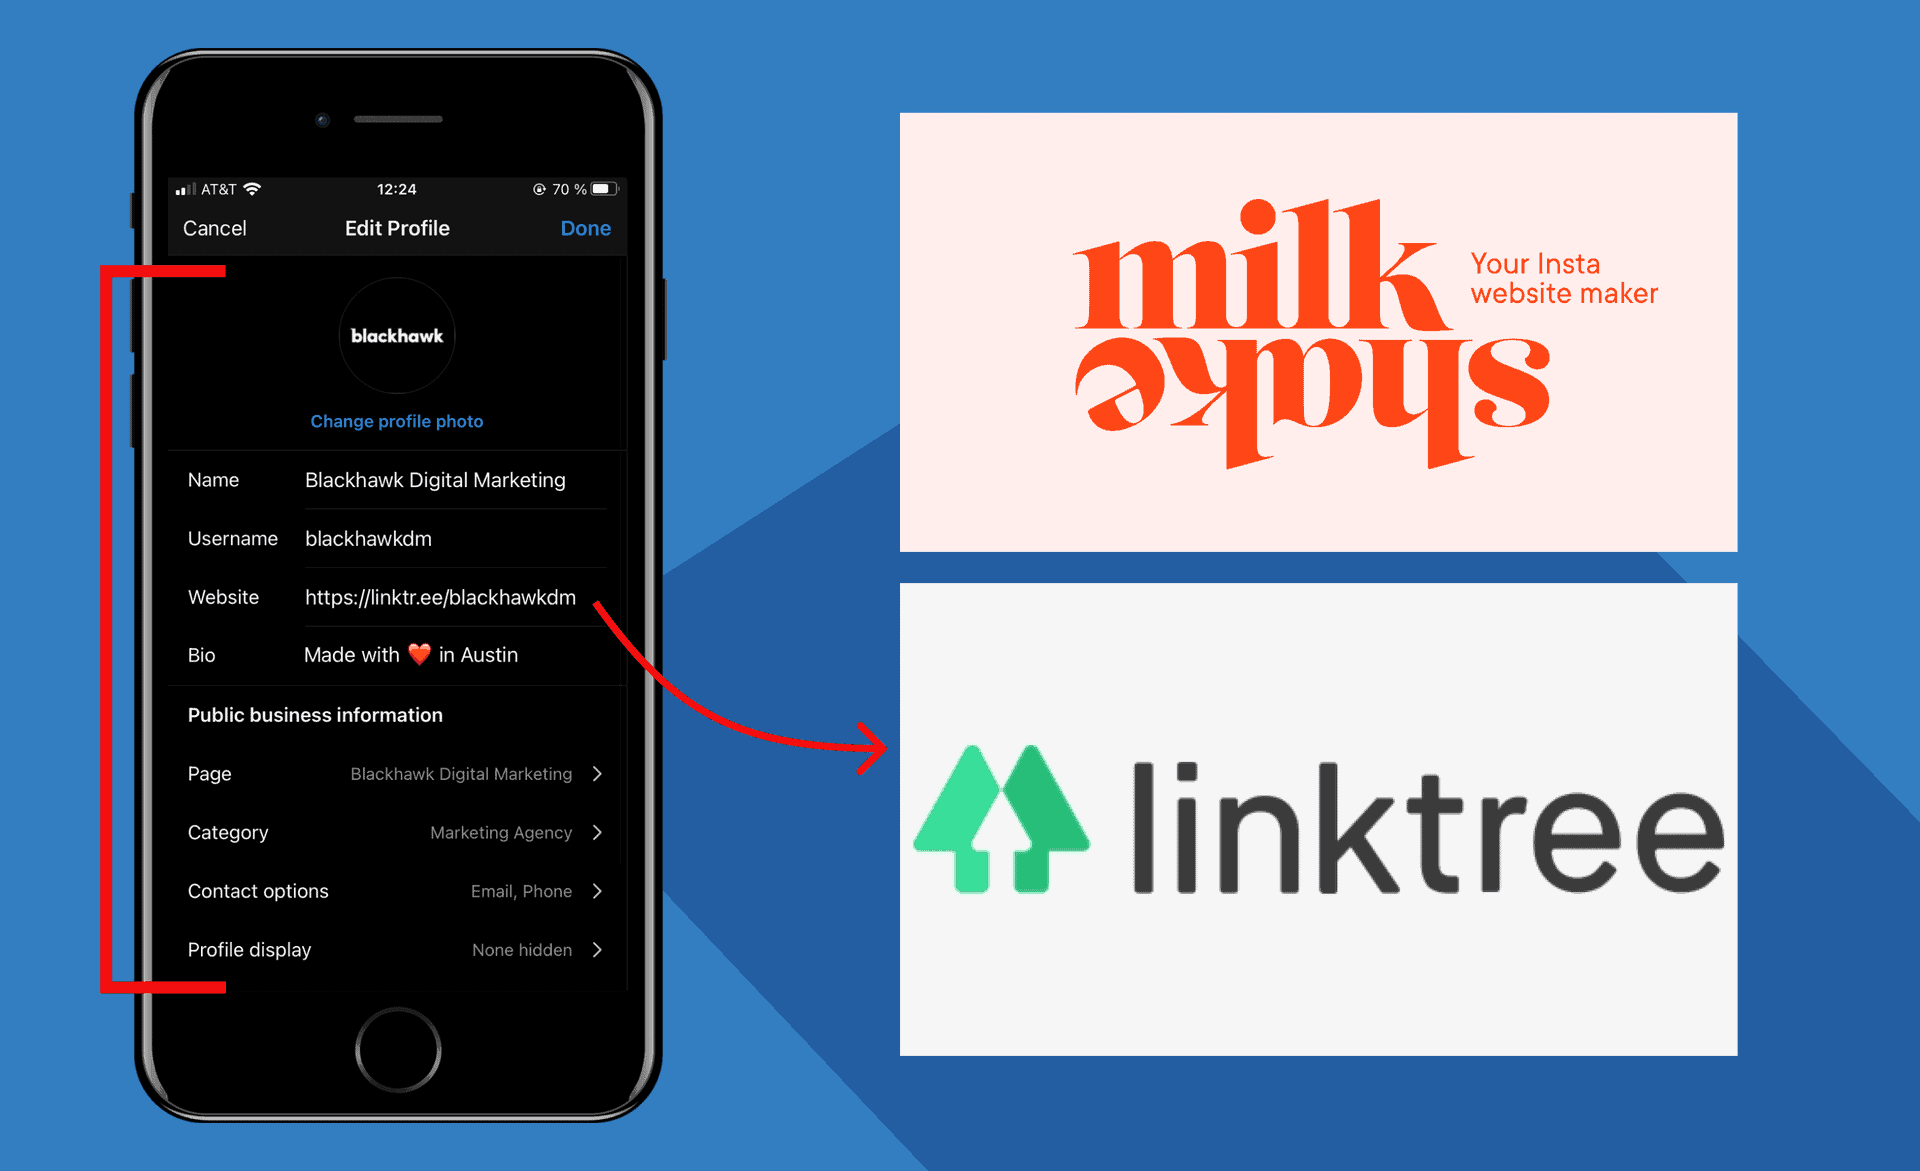 instagram profile details and milk shake and linktree logos